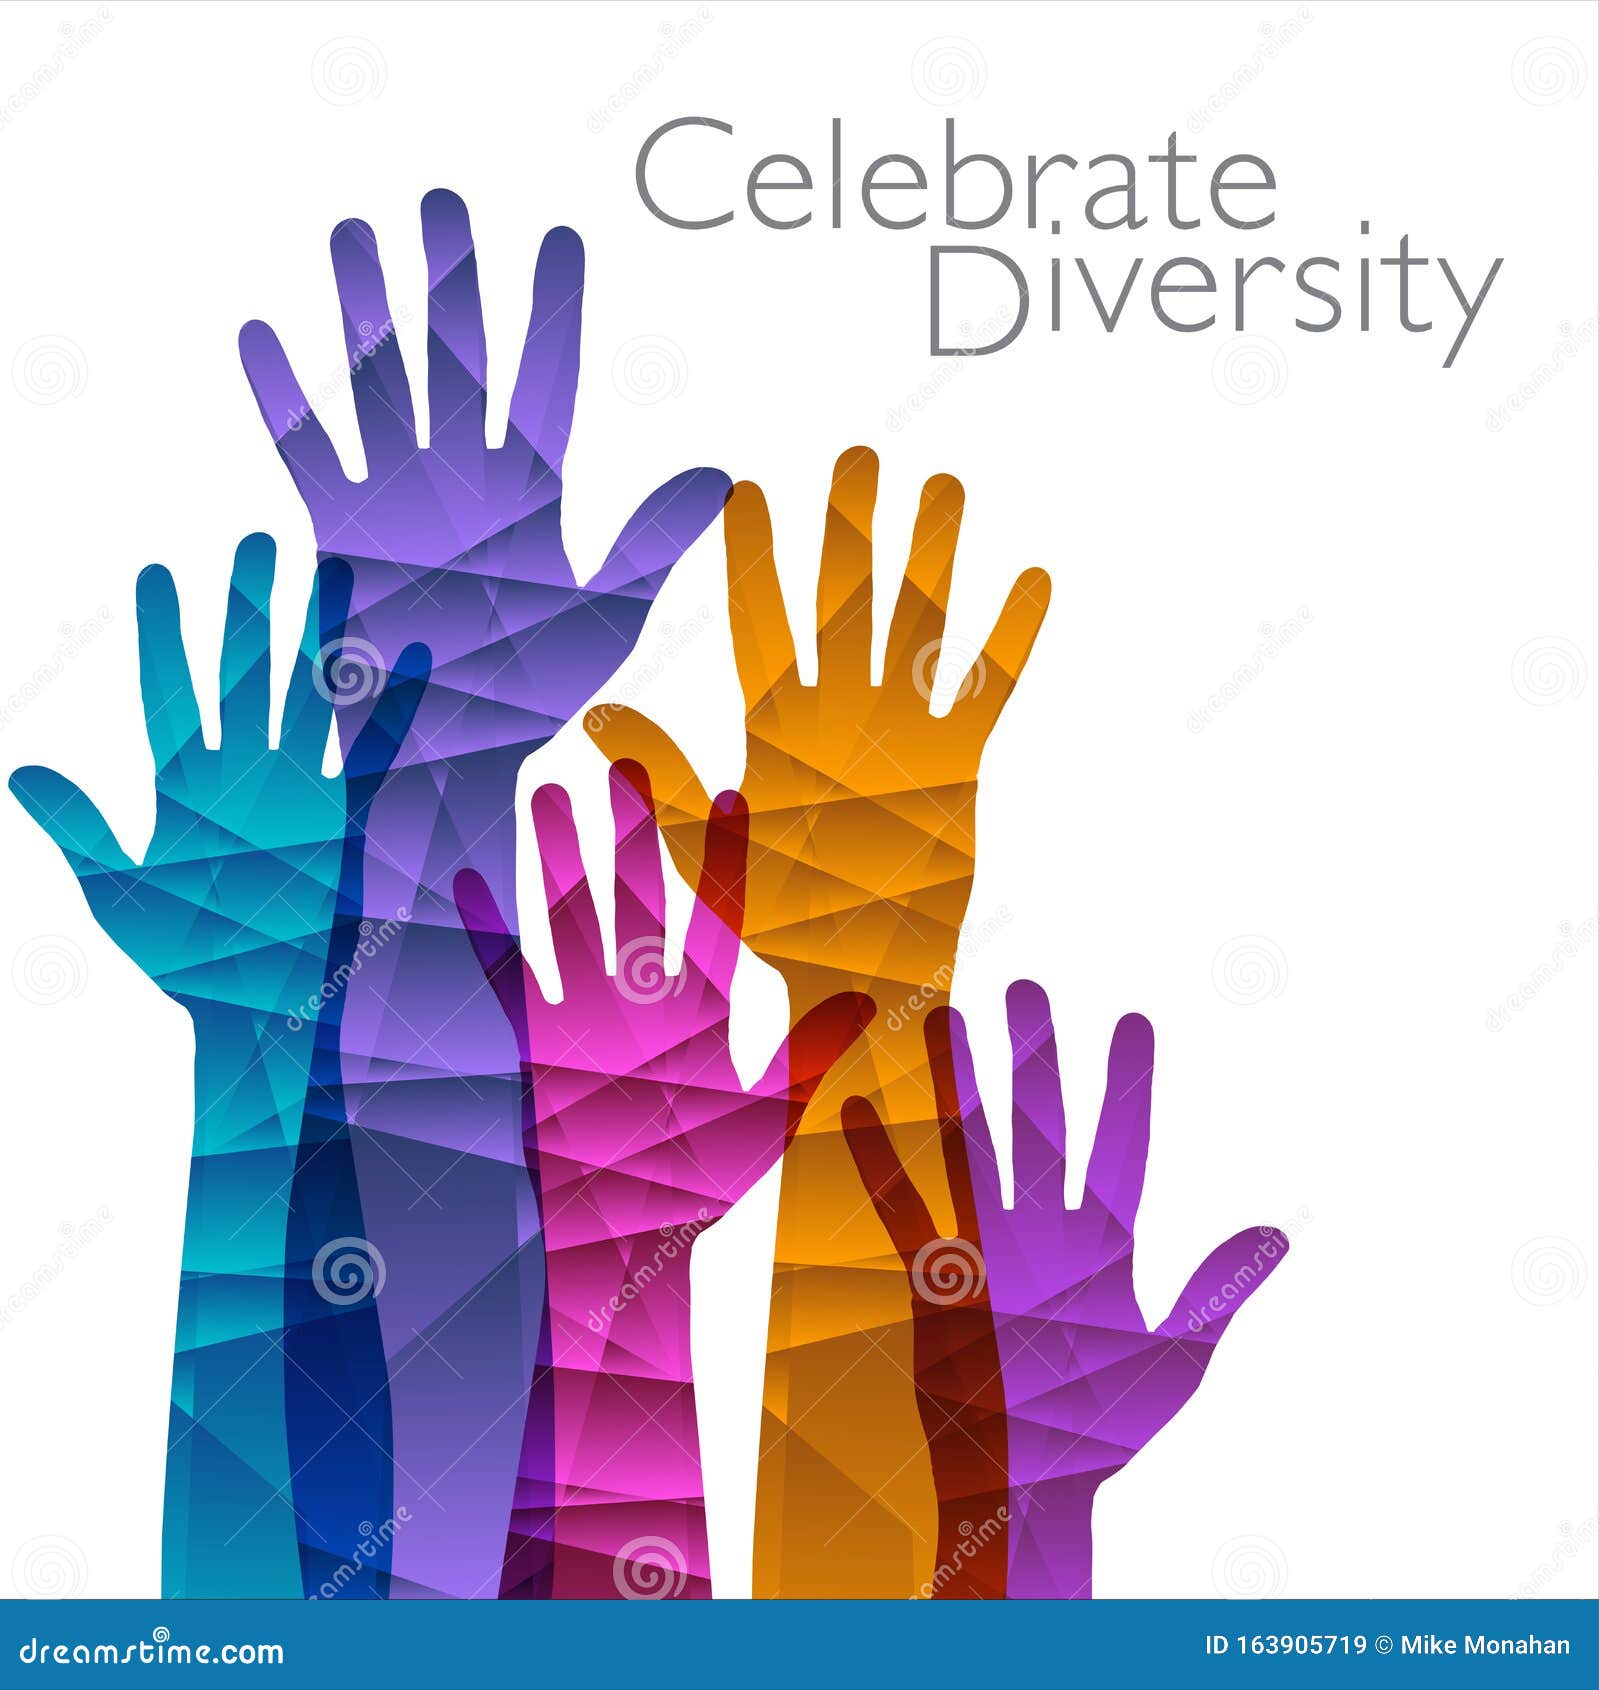 Celebrate Diversity is the Theme of this Graphic Stock Vector